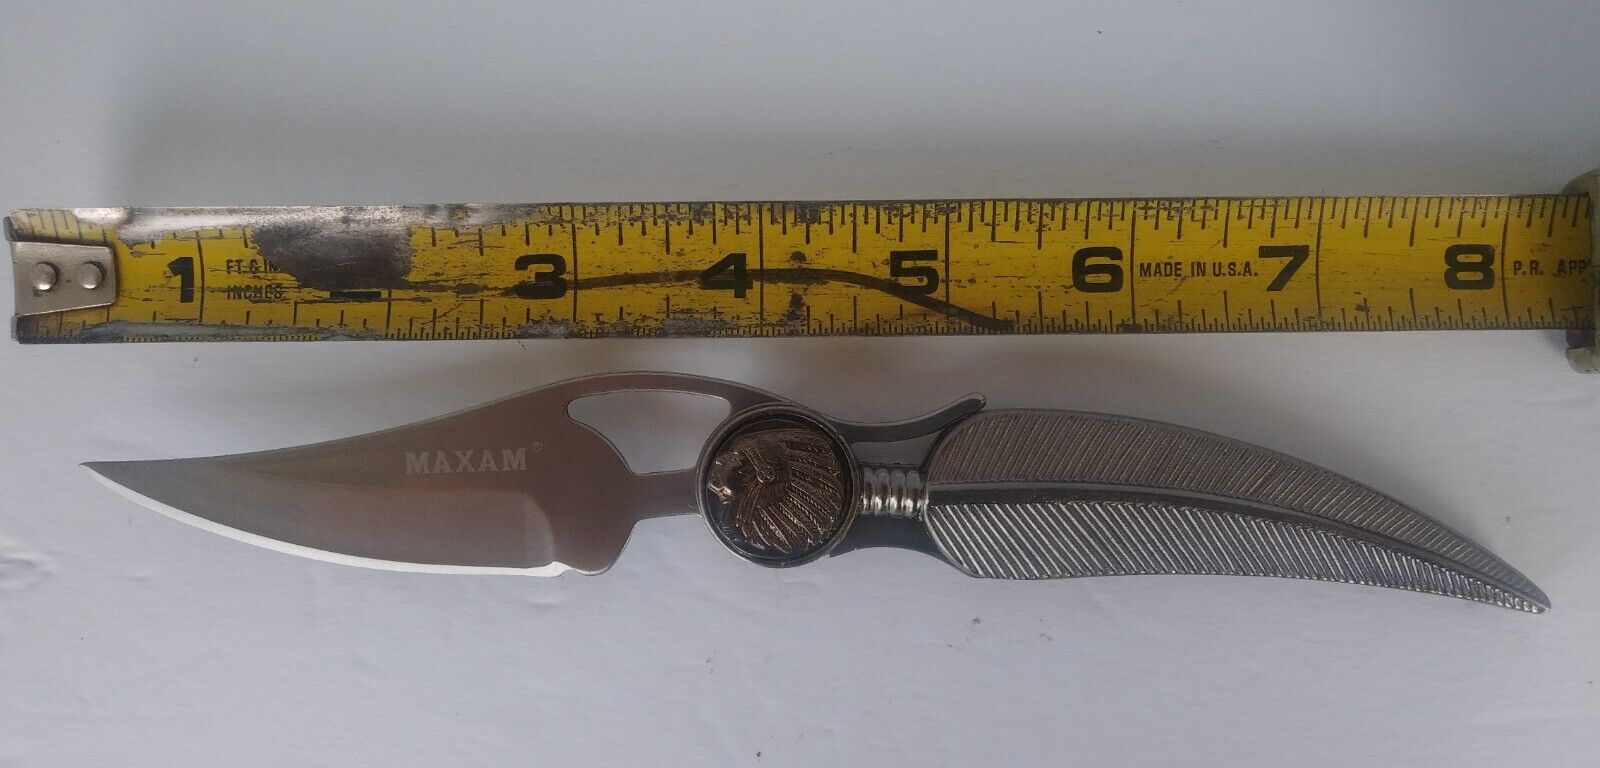 Maxam Liner Lock Knife, New with box. 8 inches long when opened.